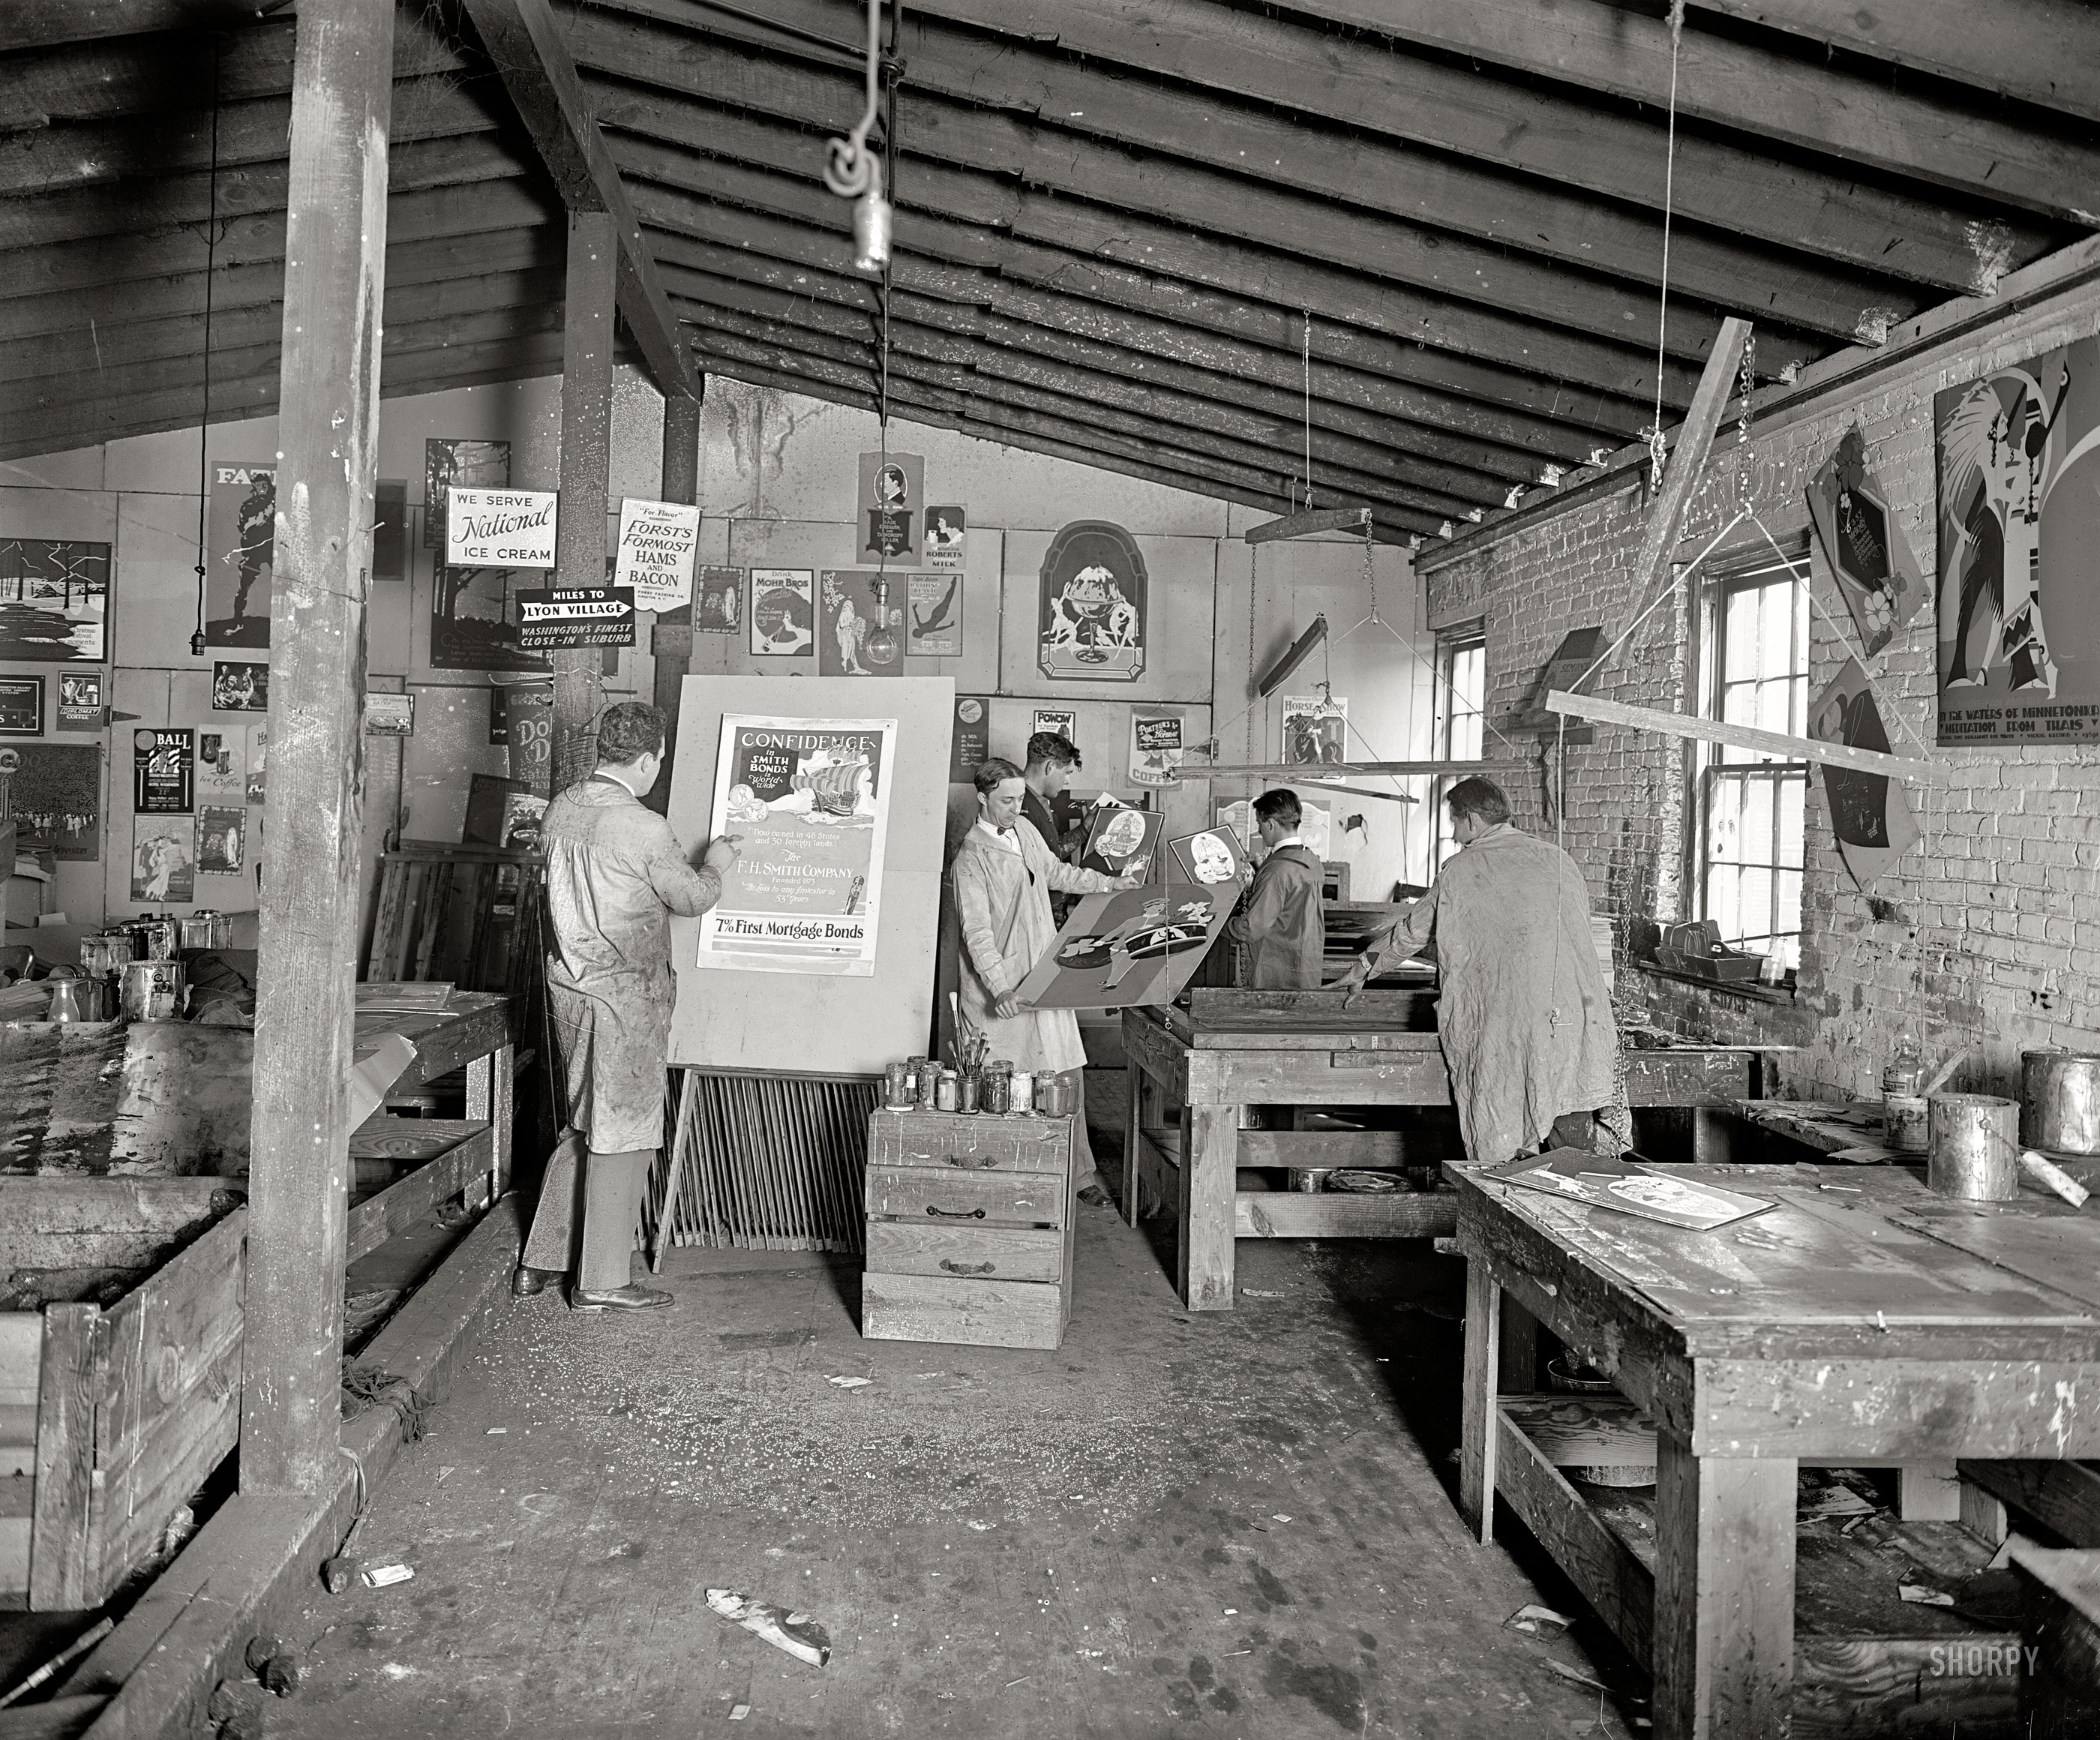 Rosslyn, Virginia, 1926. "Walling Process Inc." A graphics business owned by one George Walling. National Photo Co. Collection glass negative. View full size.